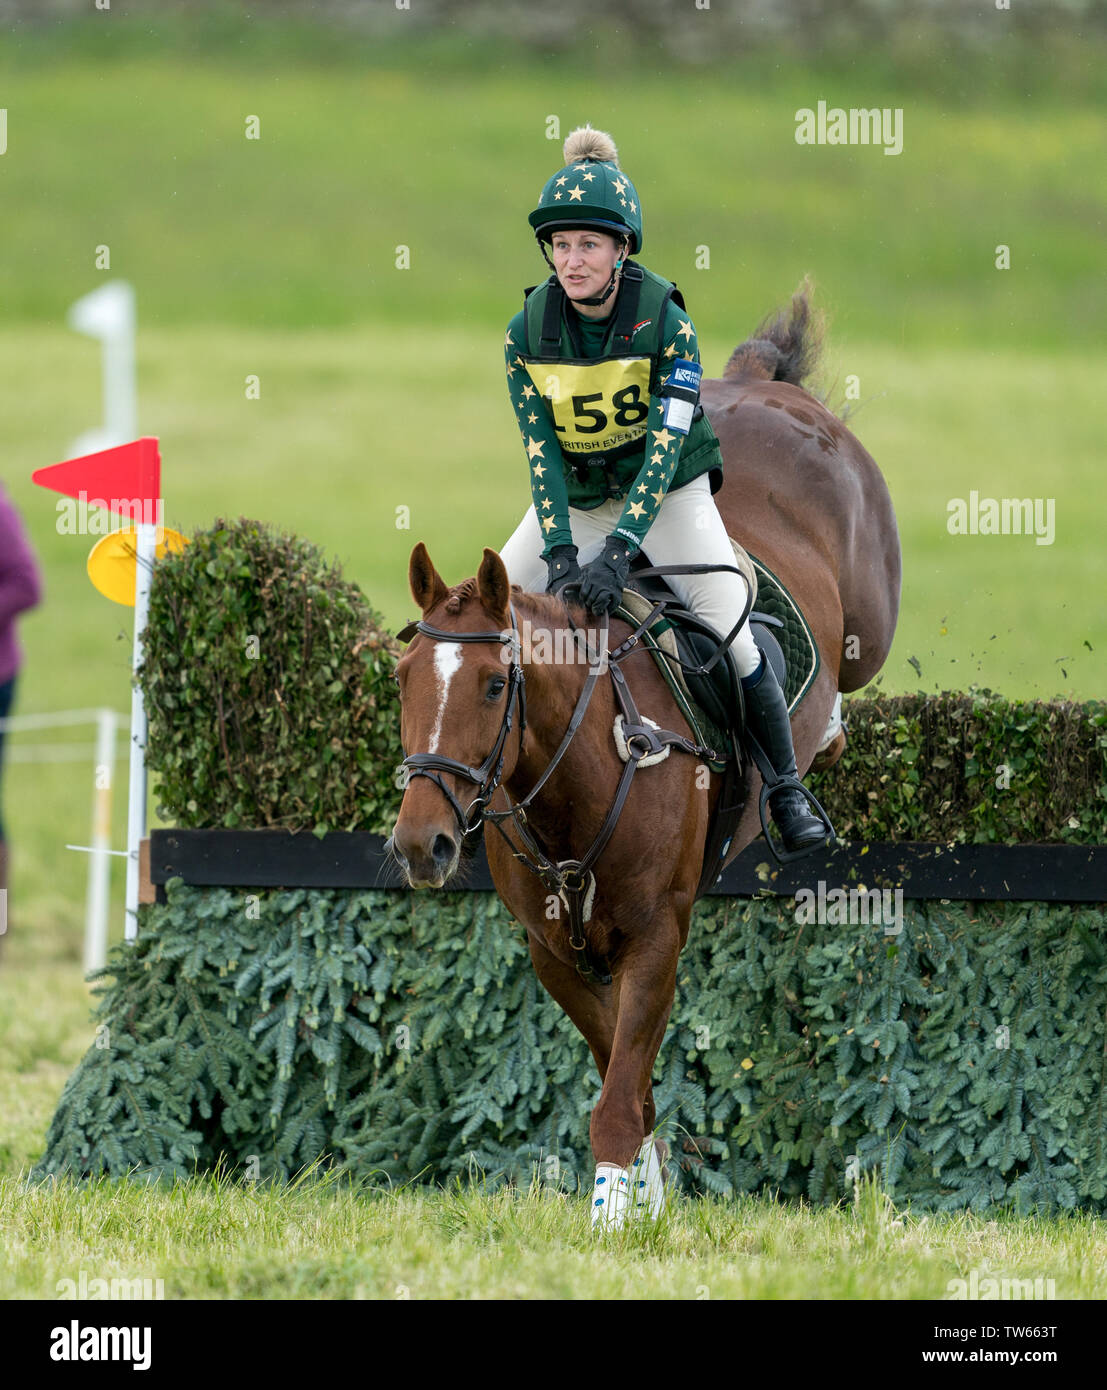 16 June 2019, Burgie House, Forres, Moray, Scotland, UK. This is a participant within the British Eventing Affiliated Event, Burgie Horse Trails. Stock Photo